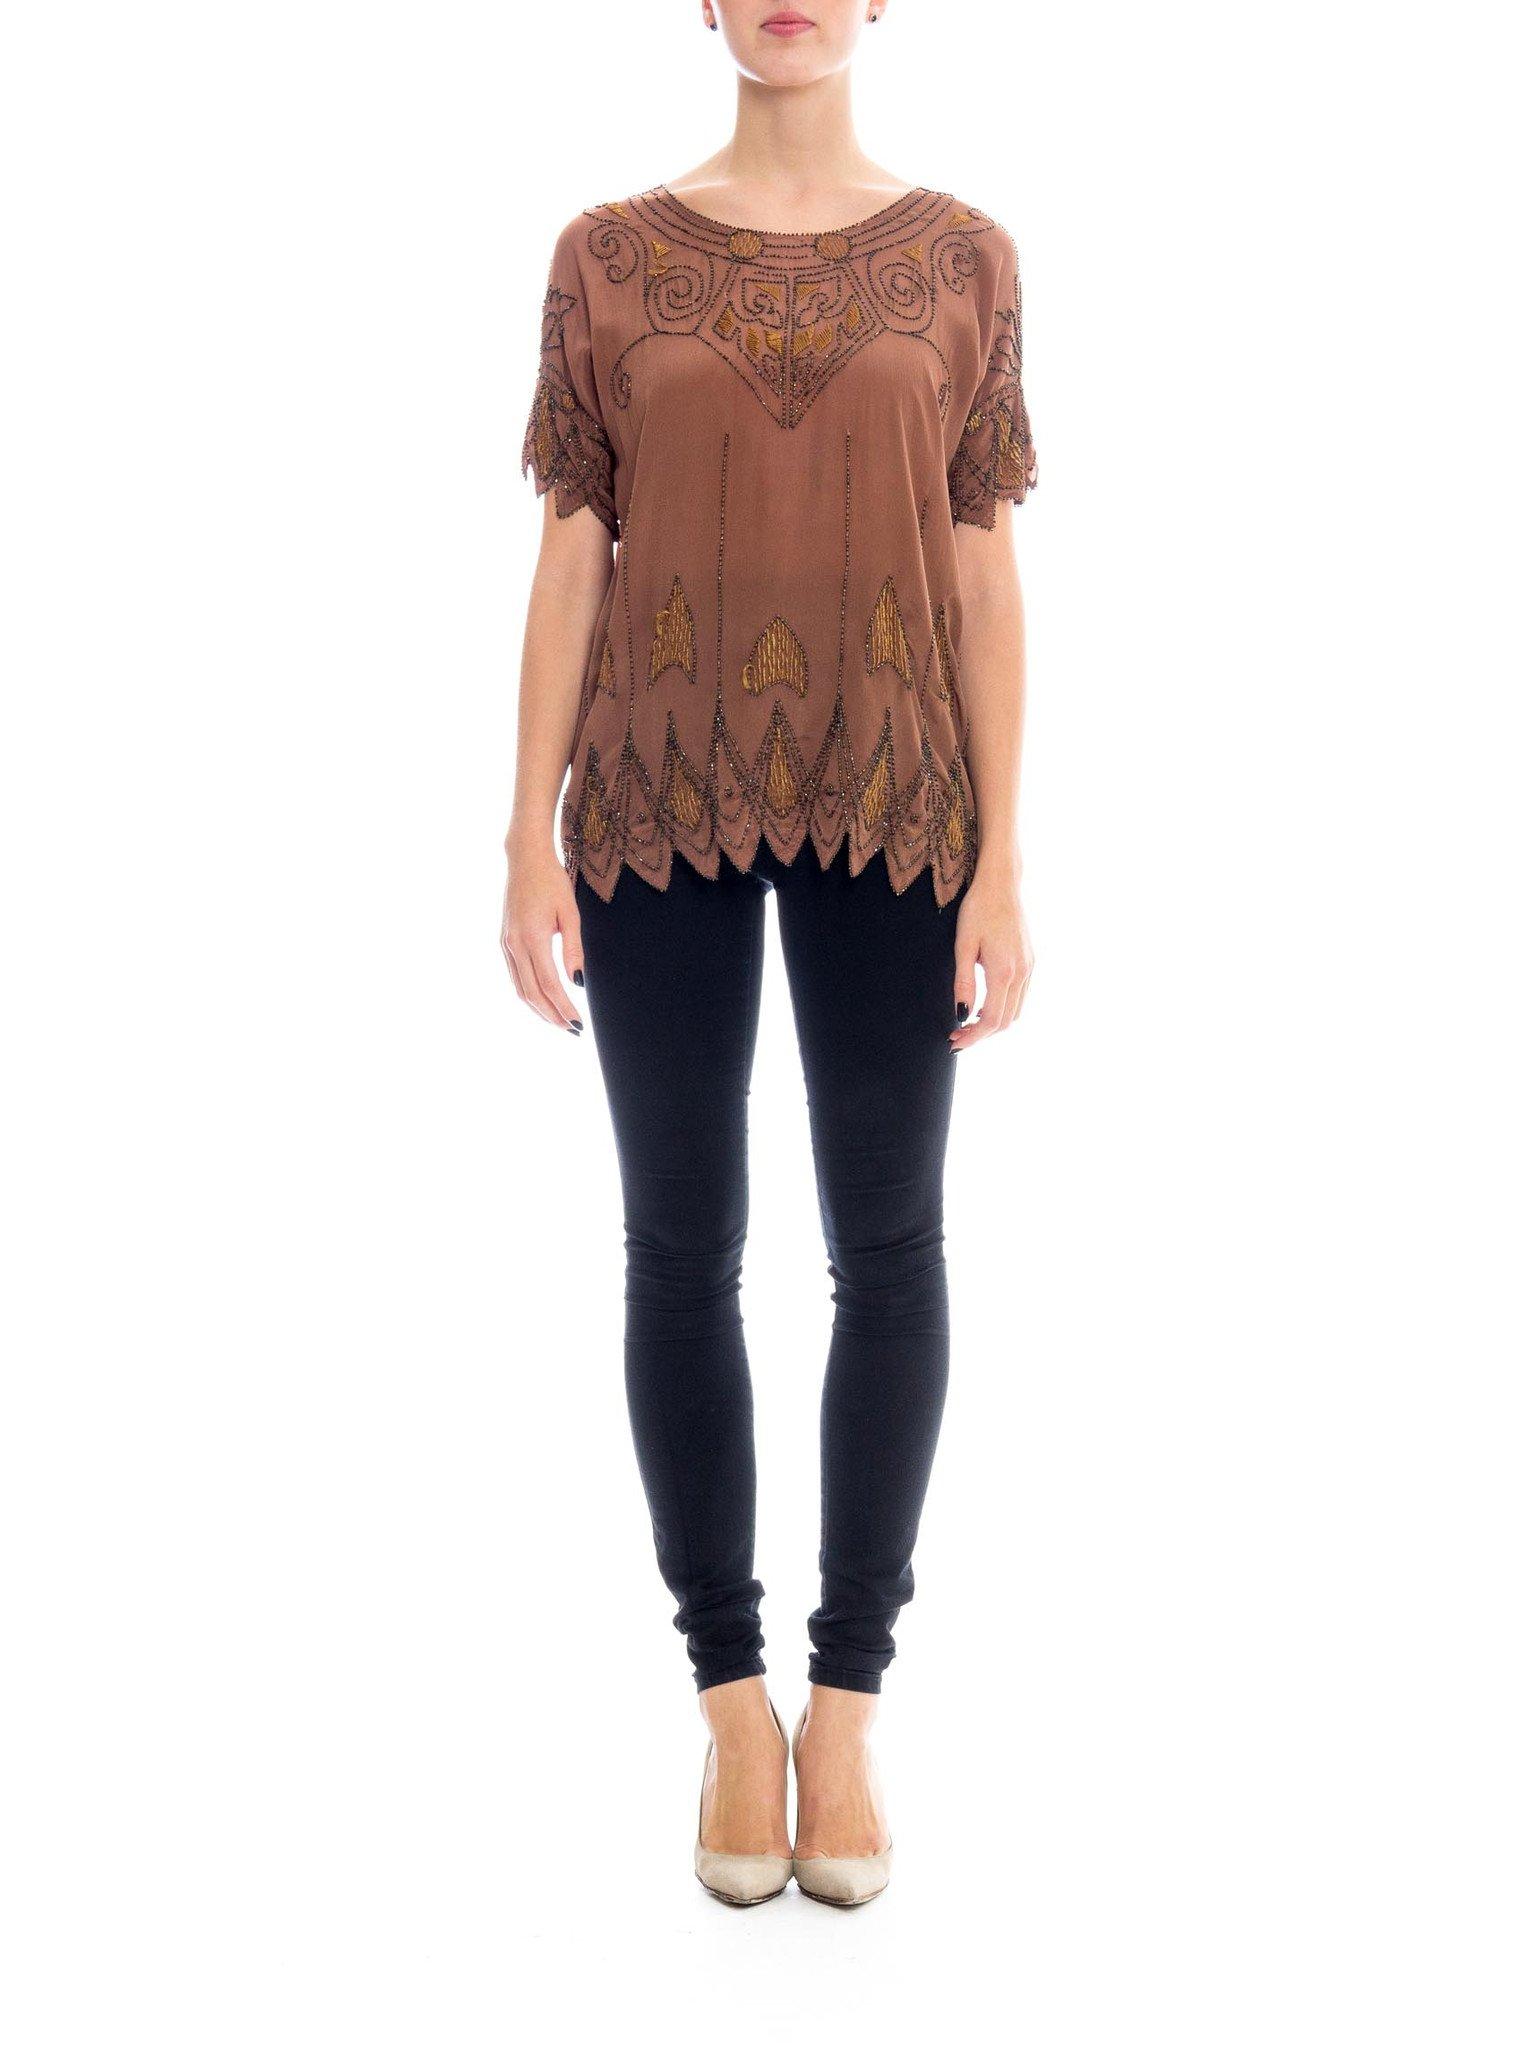 1920S Silk Crepe De Chine Deco Beaded & Embroidered Top For Sale 2